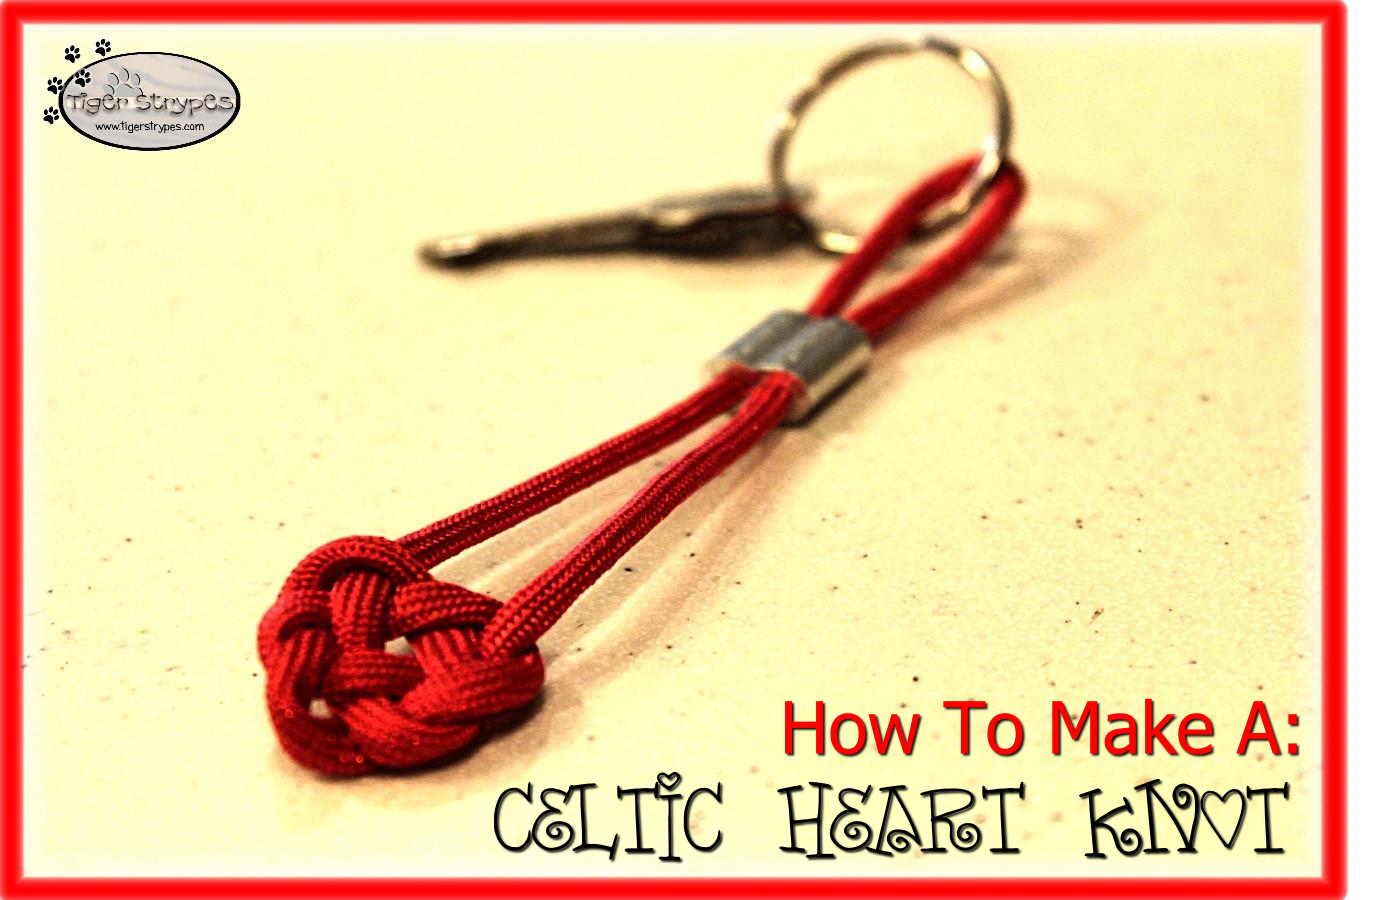 How To Make Celtic Knot Keychain #Craft - TigerStrypes Blog